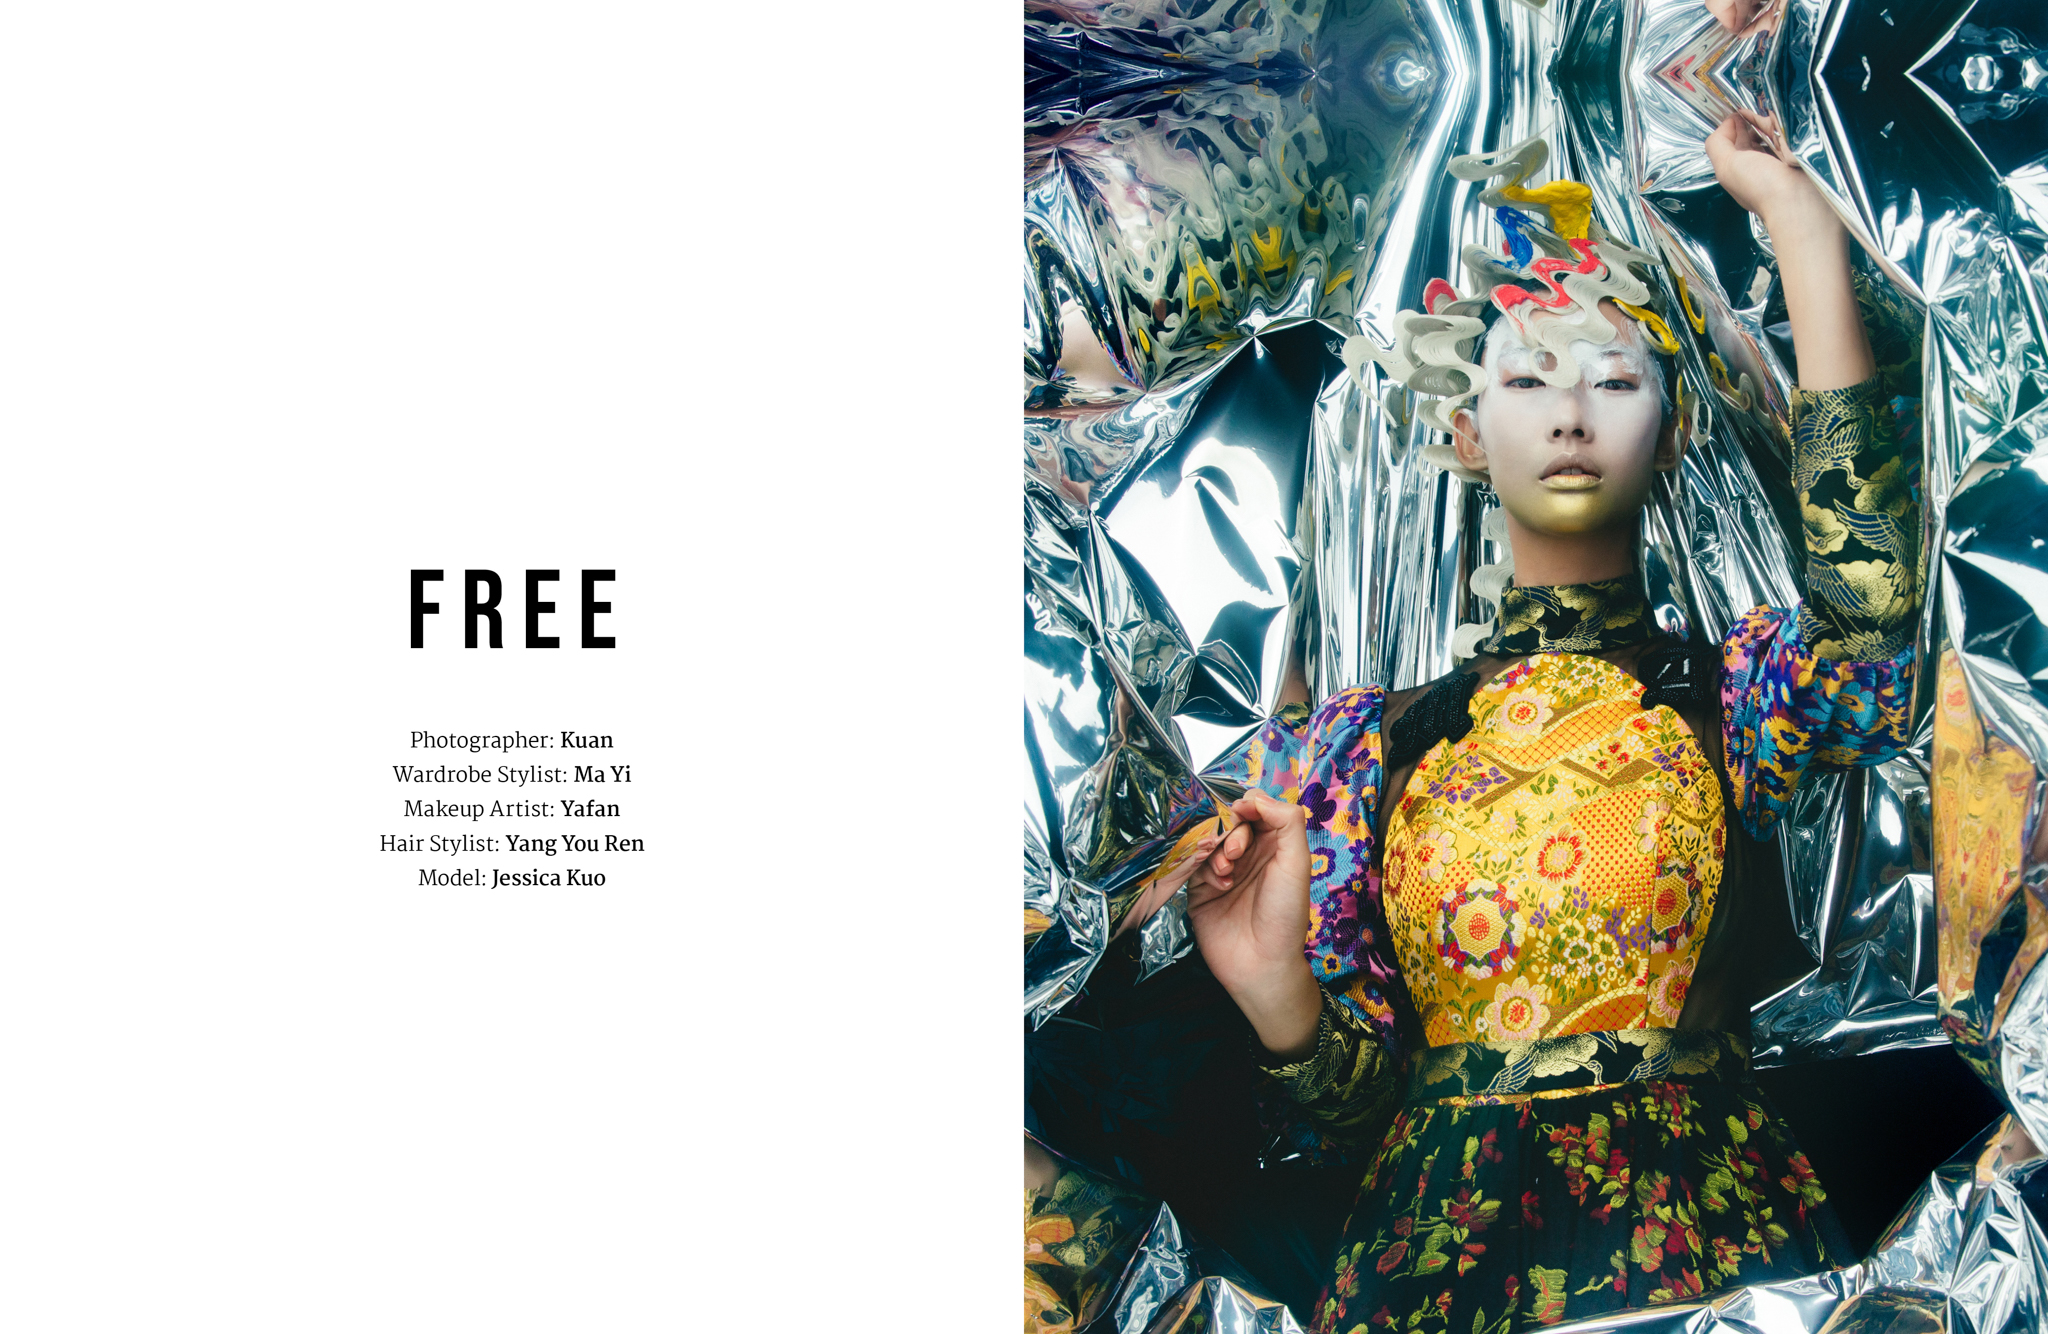 Free by Kuan for Flanelle Magazine | Flanelle Magazine